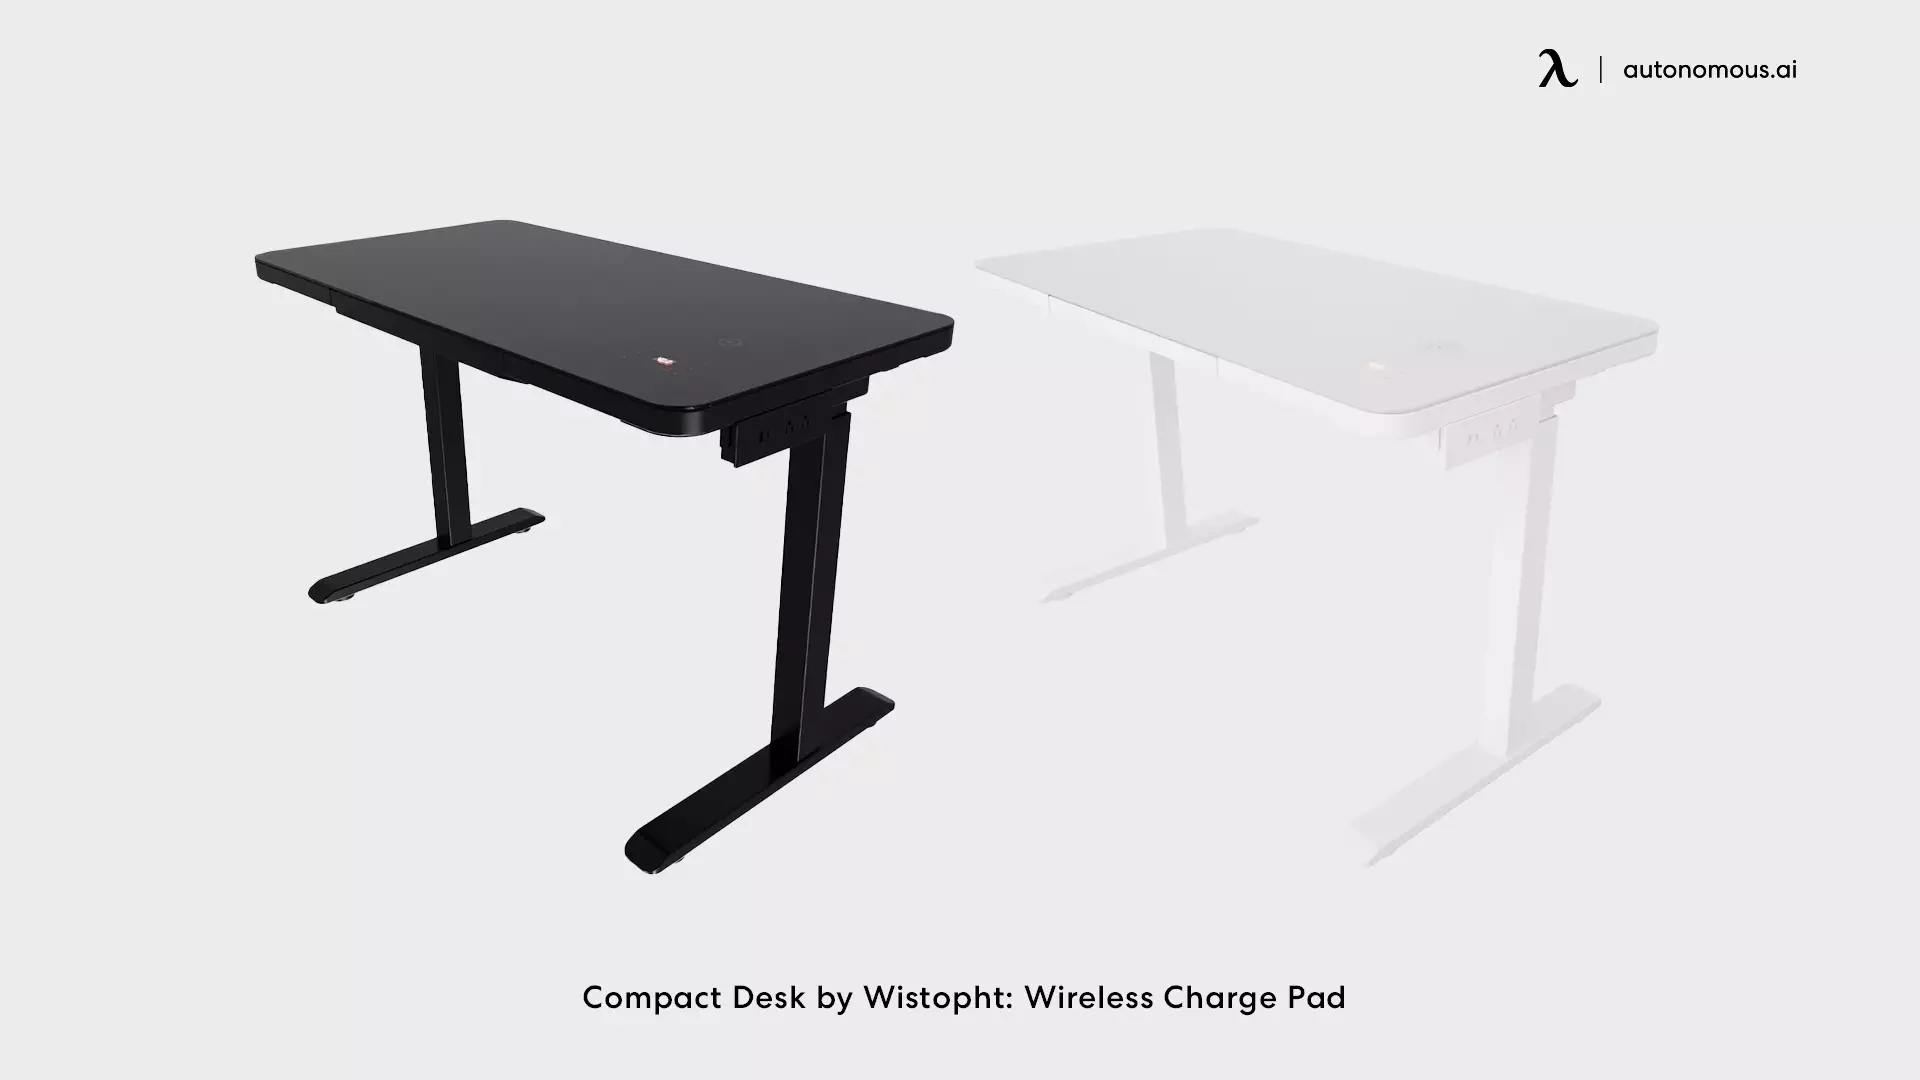 Wistopht CompactDesk desk with wireless charging